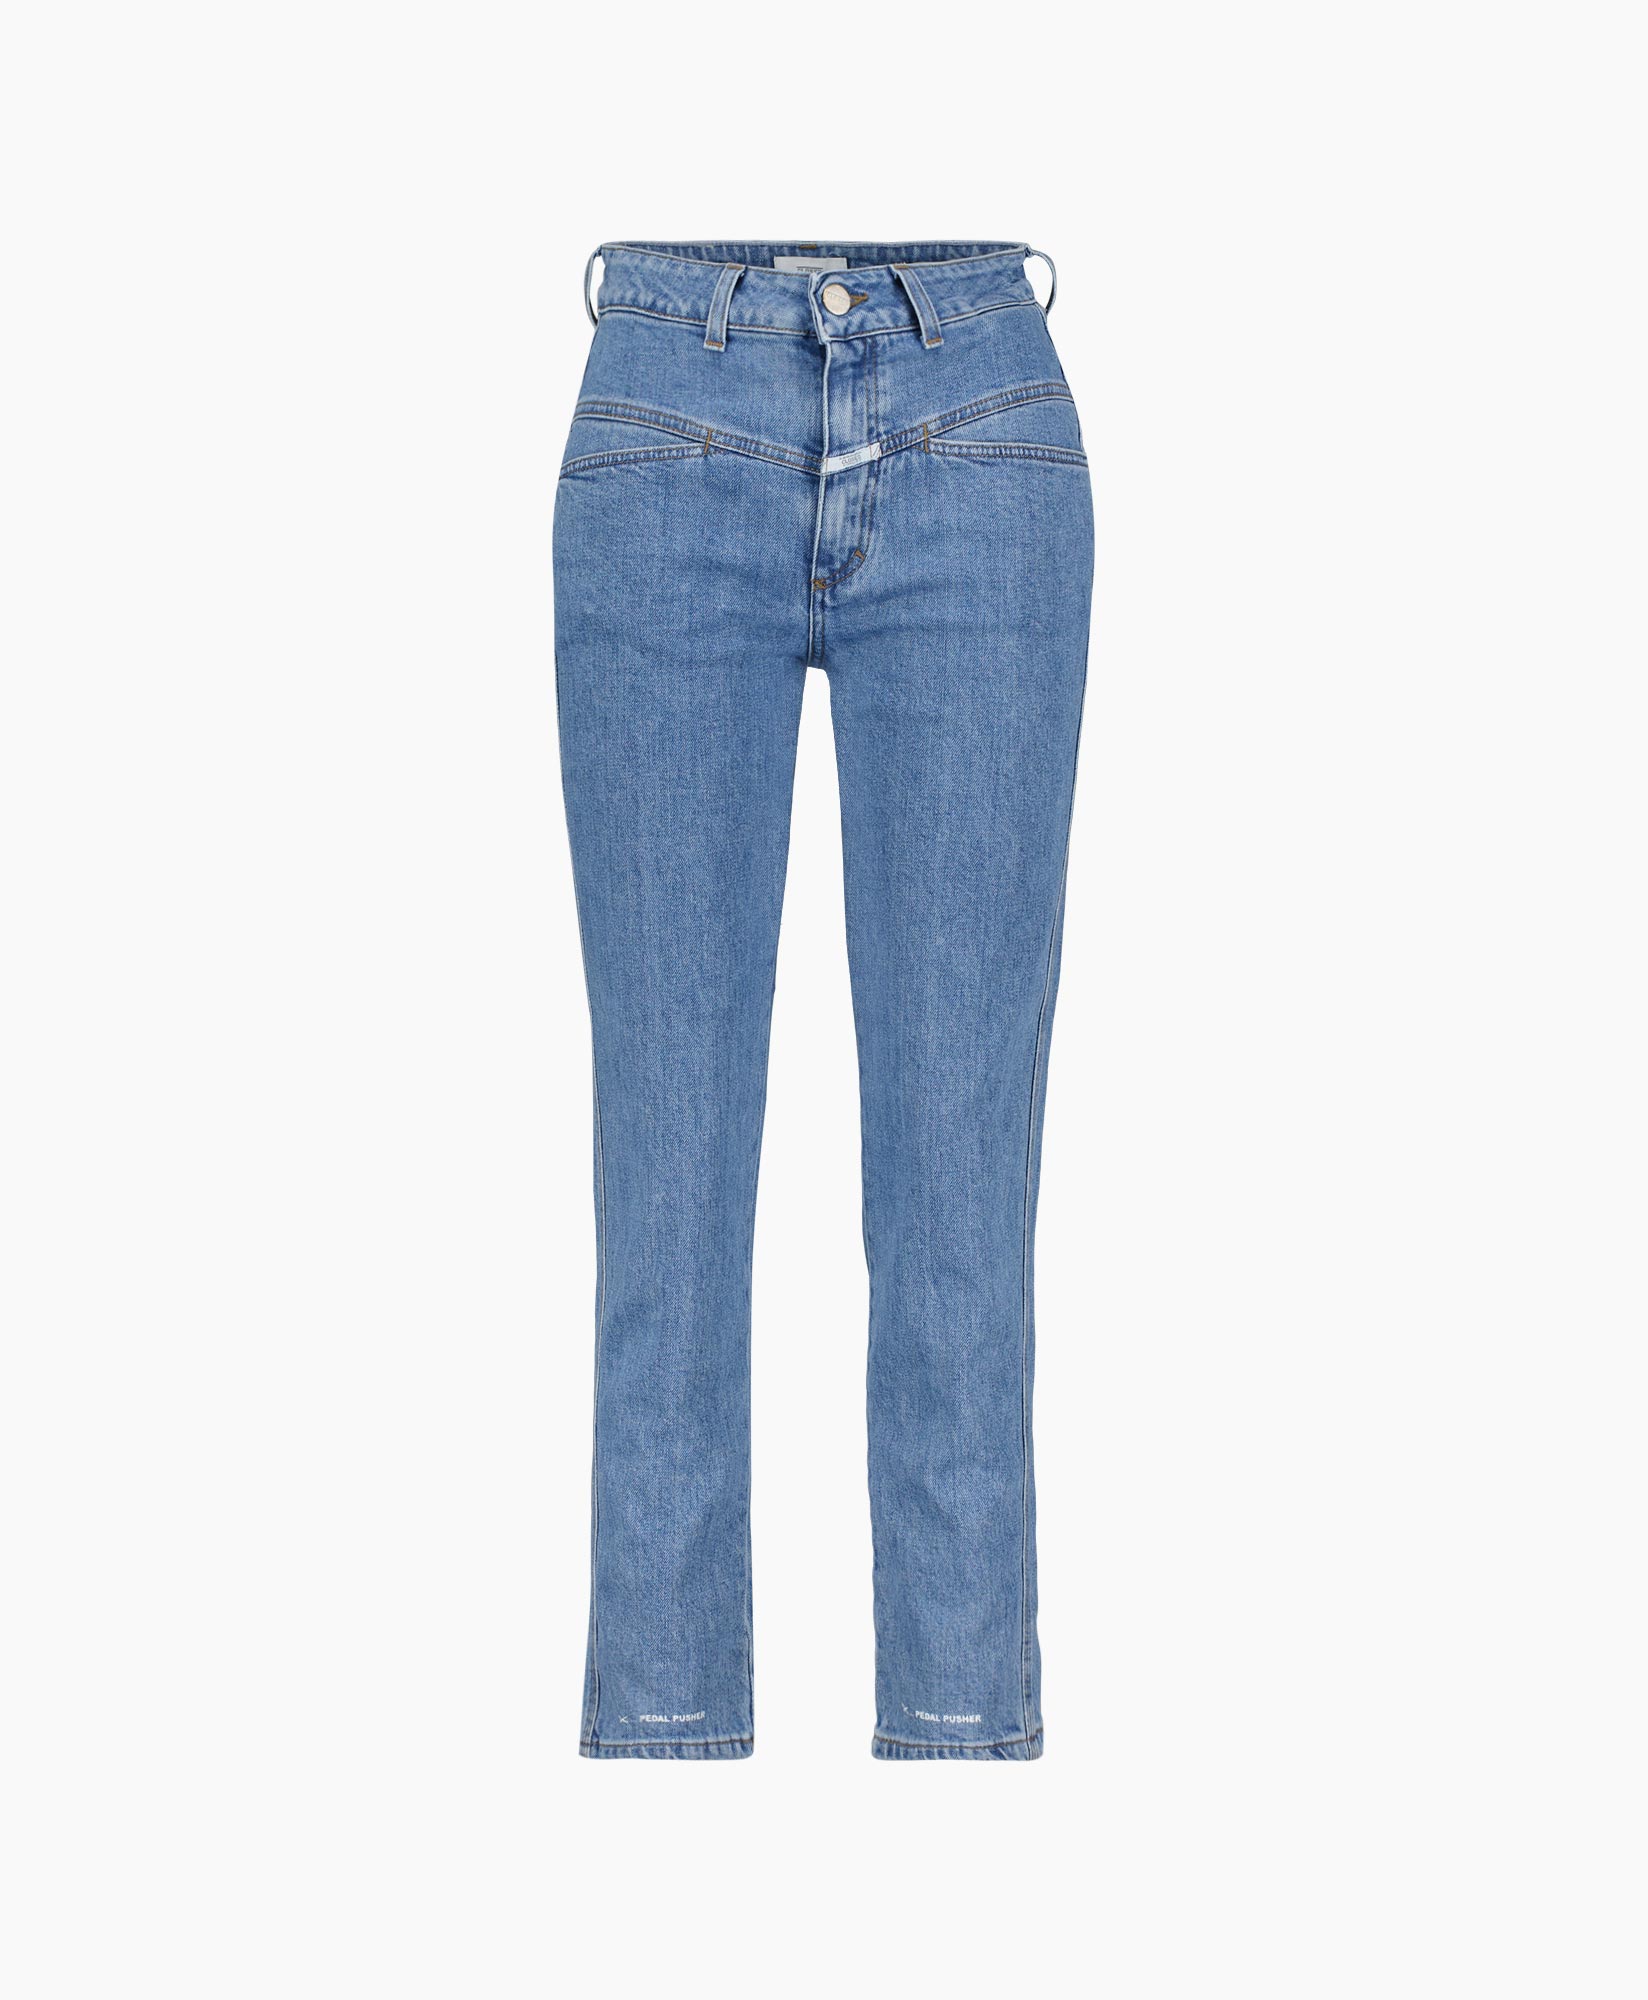 Closed Jeans Pedal Pusher Blauw